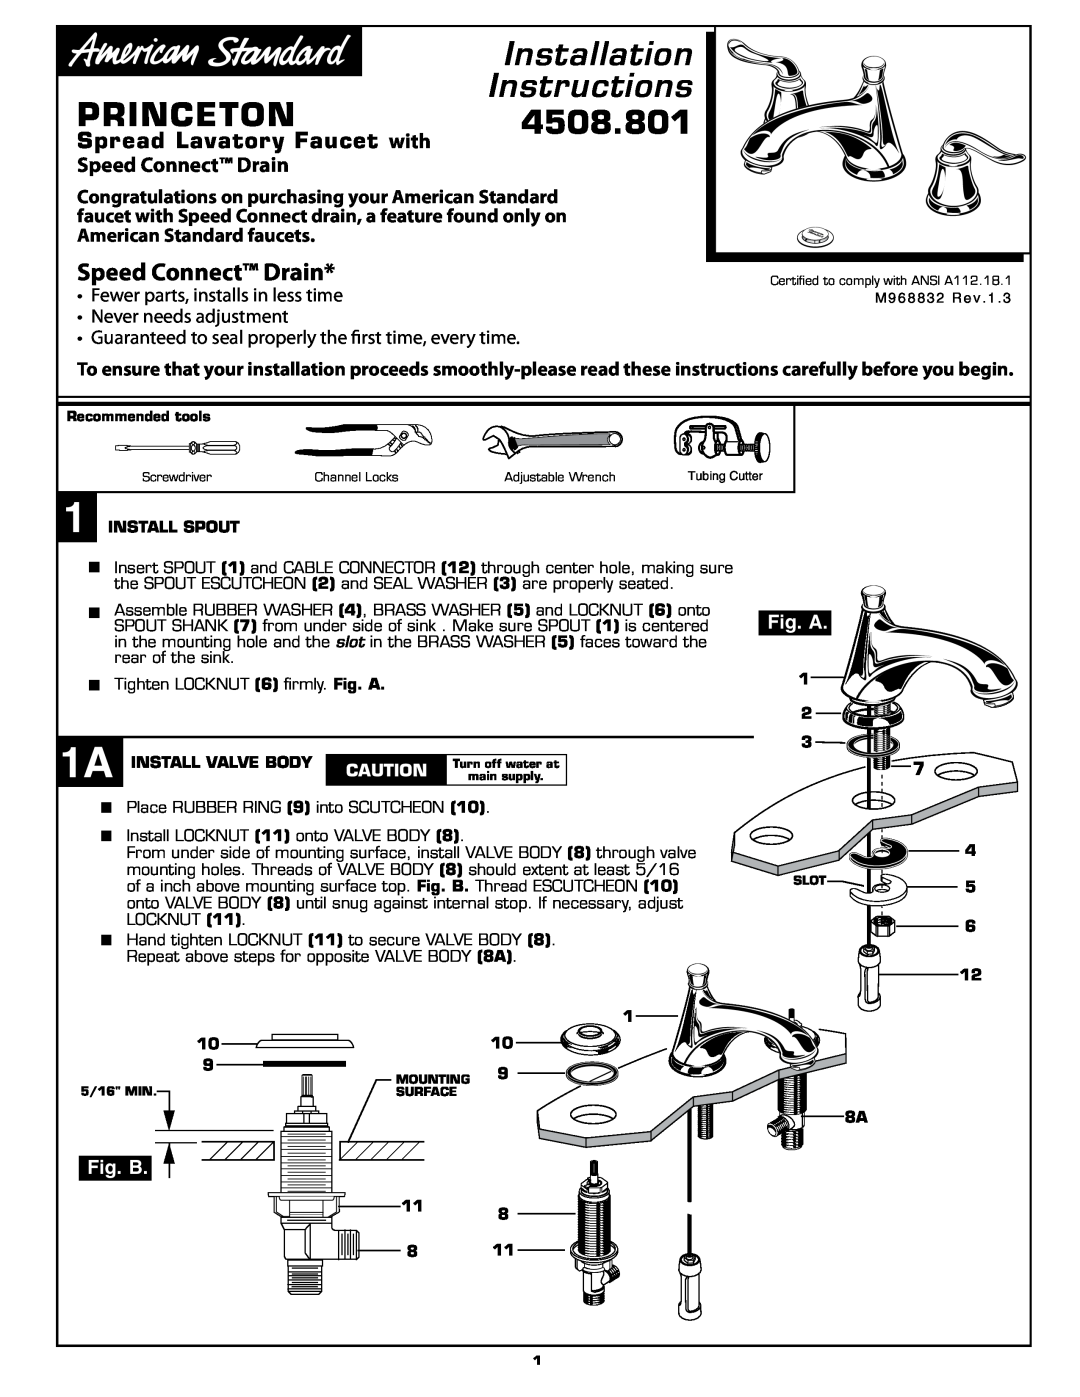 American Standard 4508.801 installation instructions Installation, Princeton, Instructions, Speed Connect Drain, Fig. B 